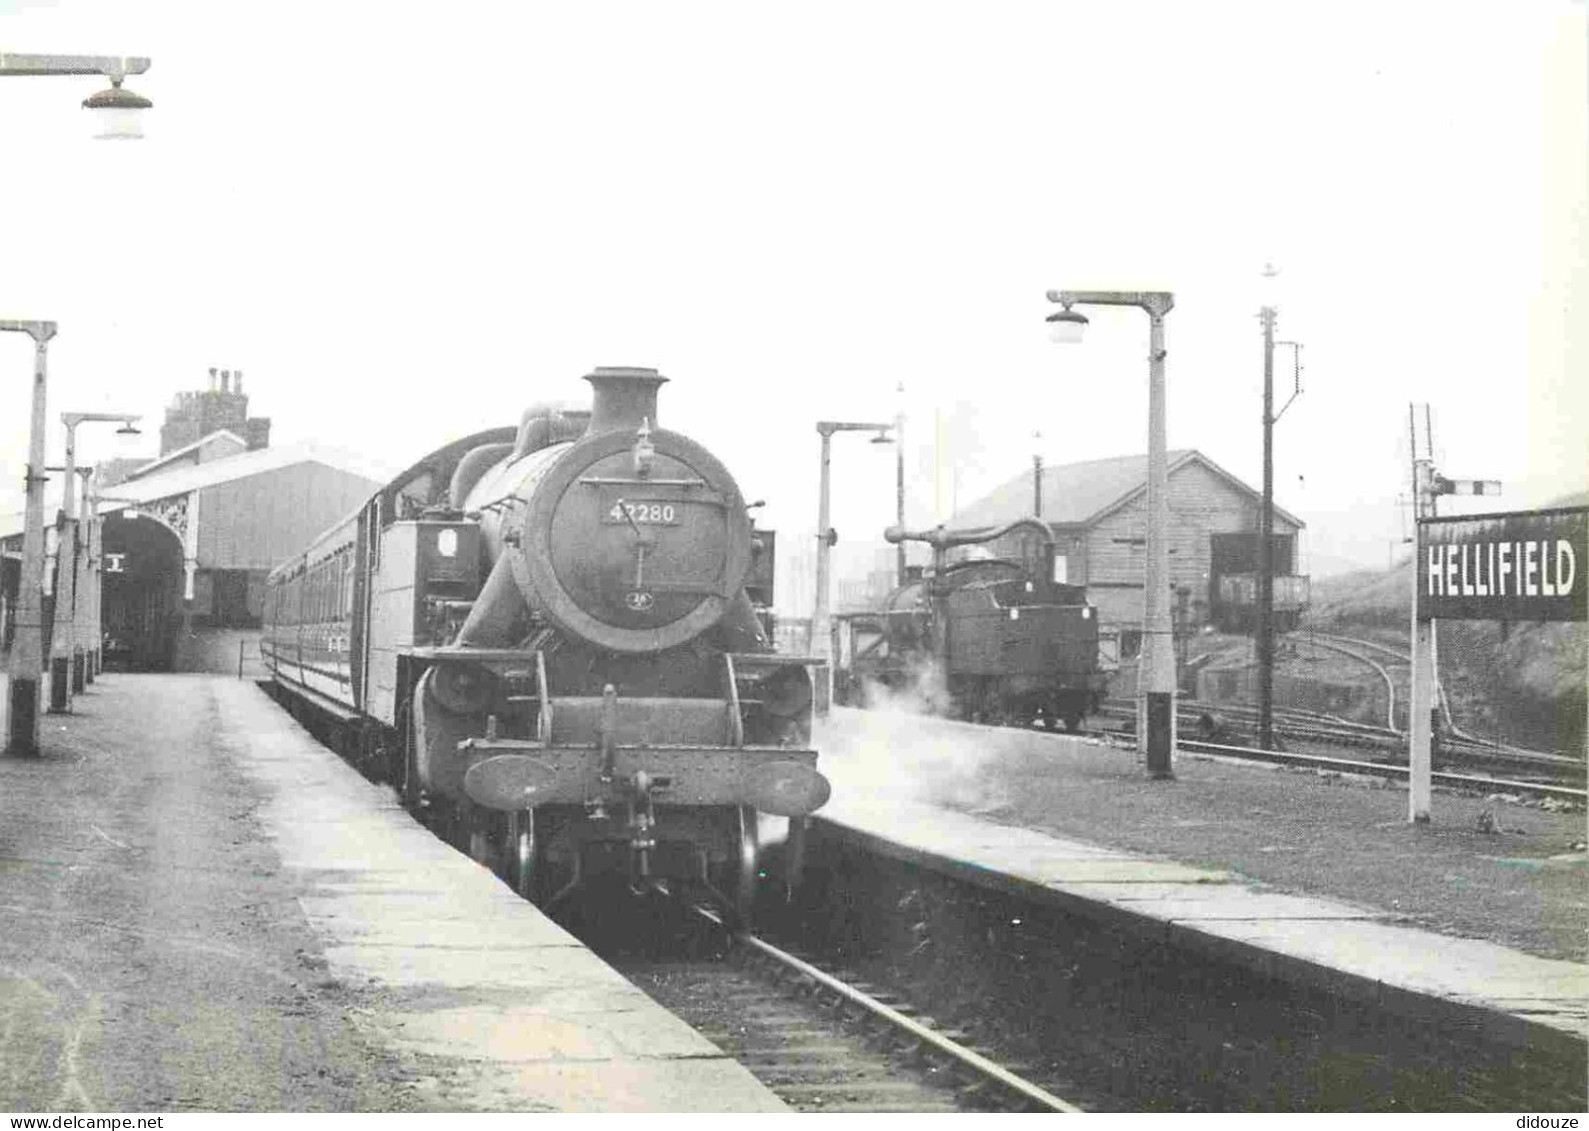 Trains - Gares Avec Trains - Engine No. 42280 With A Train For Blackburn At Hellifield On 3rd. August 1962. - Royaume Un - Bahnhöfe Mit Zügen